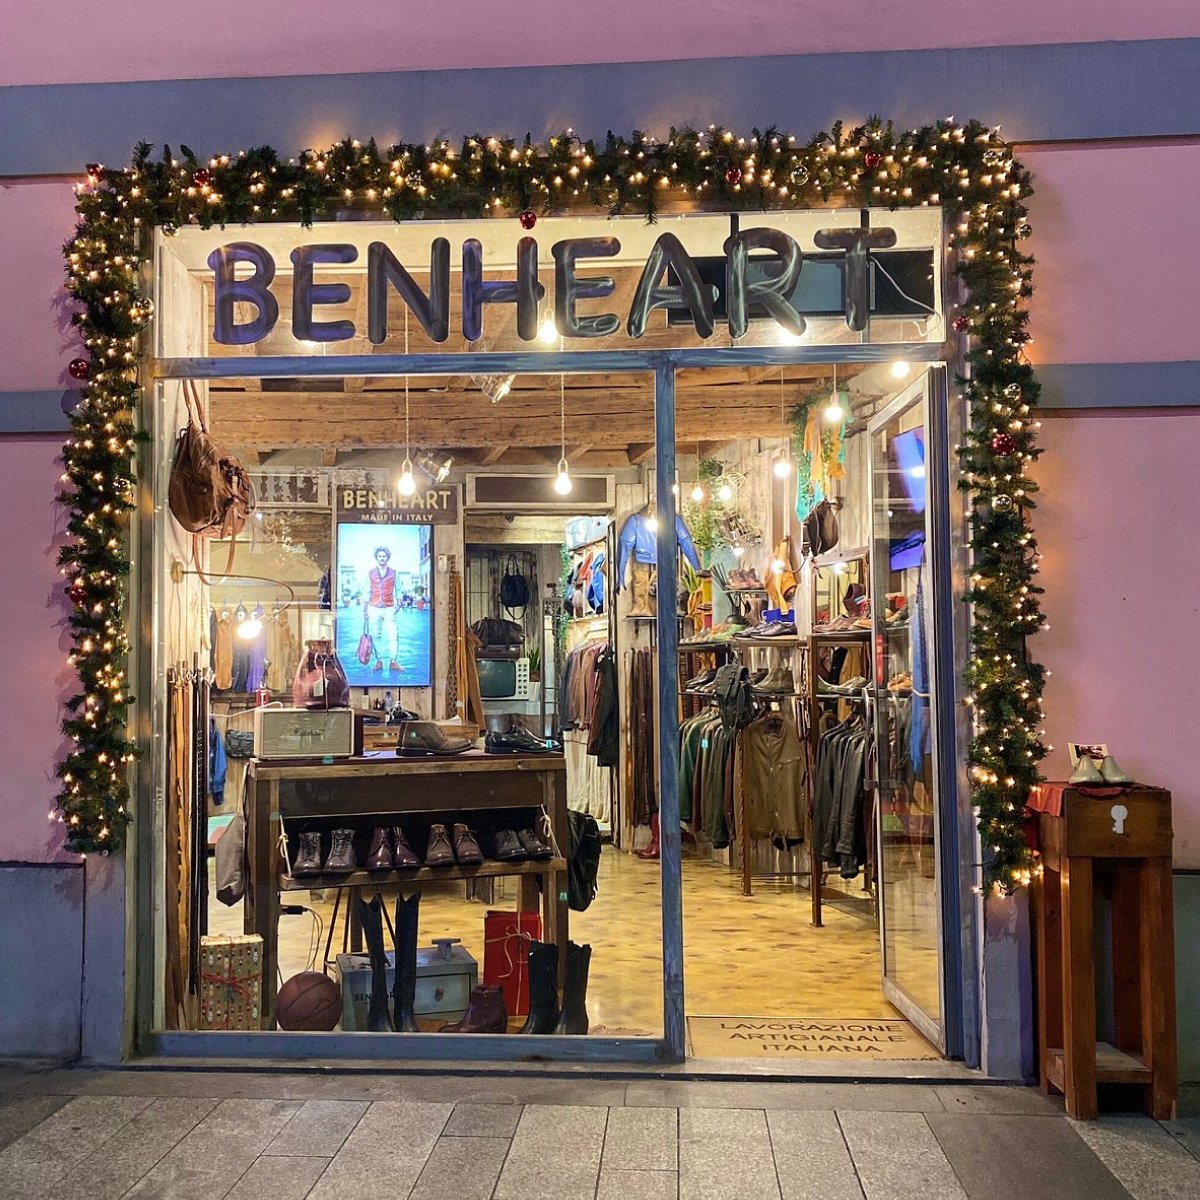 Discover the art of Italian craftsmanship at Benheart boutiques! Witness the magic of crafting custom belts and explore a collection of other exquisite leather products. Meticulously handmade in Italy with premium materials.
.
#ItalianCraftsmanship #HandmadeInItaly